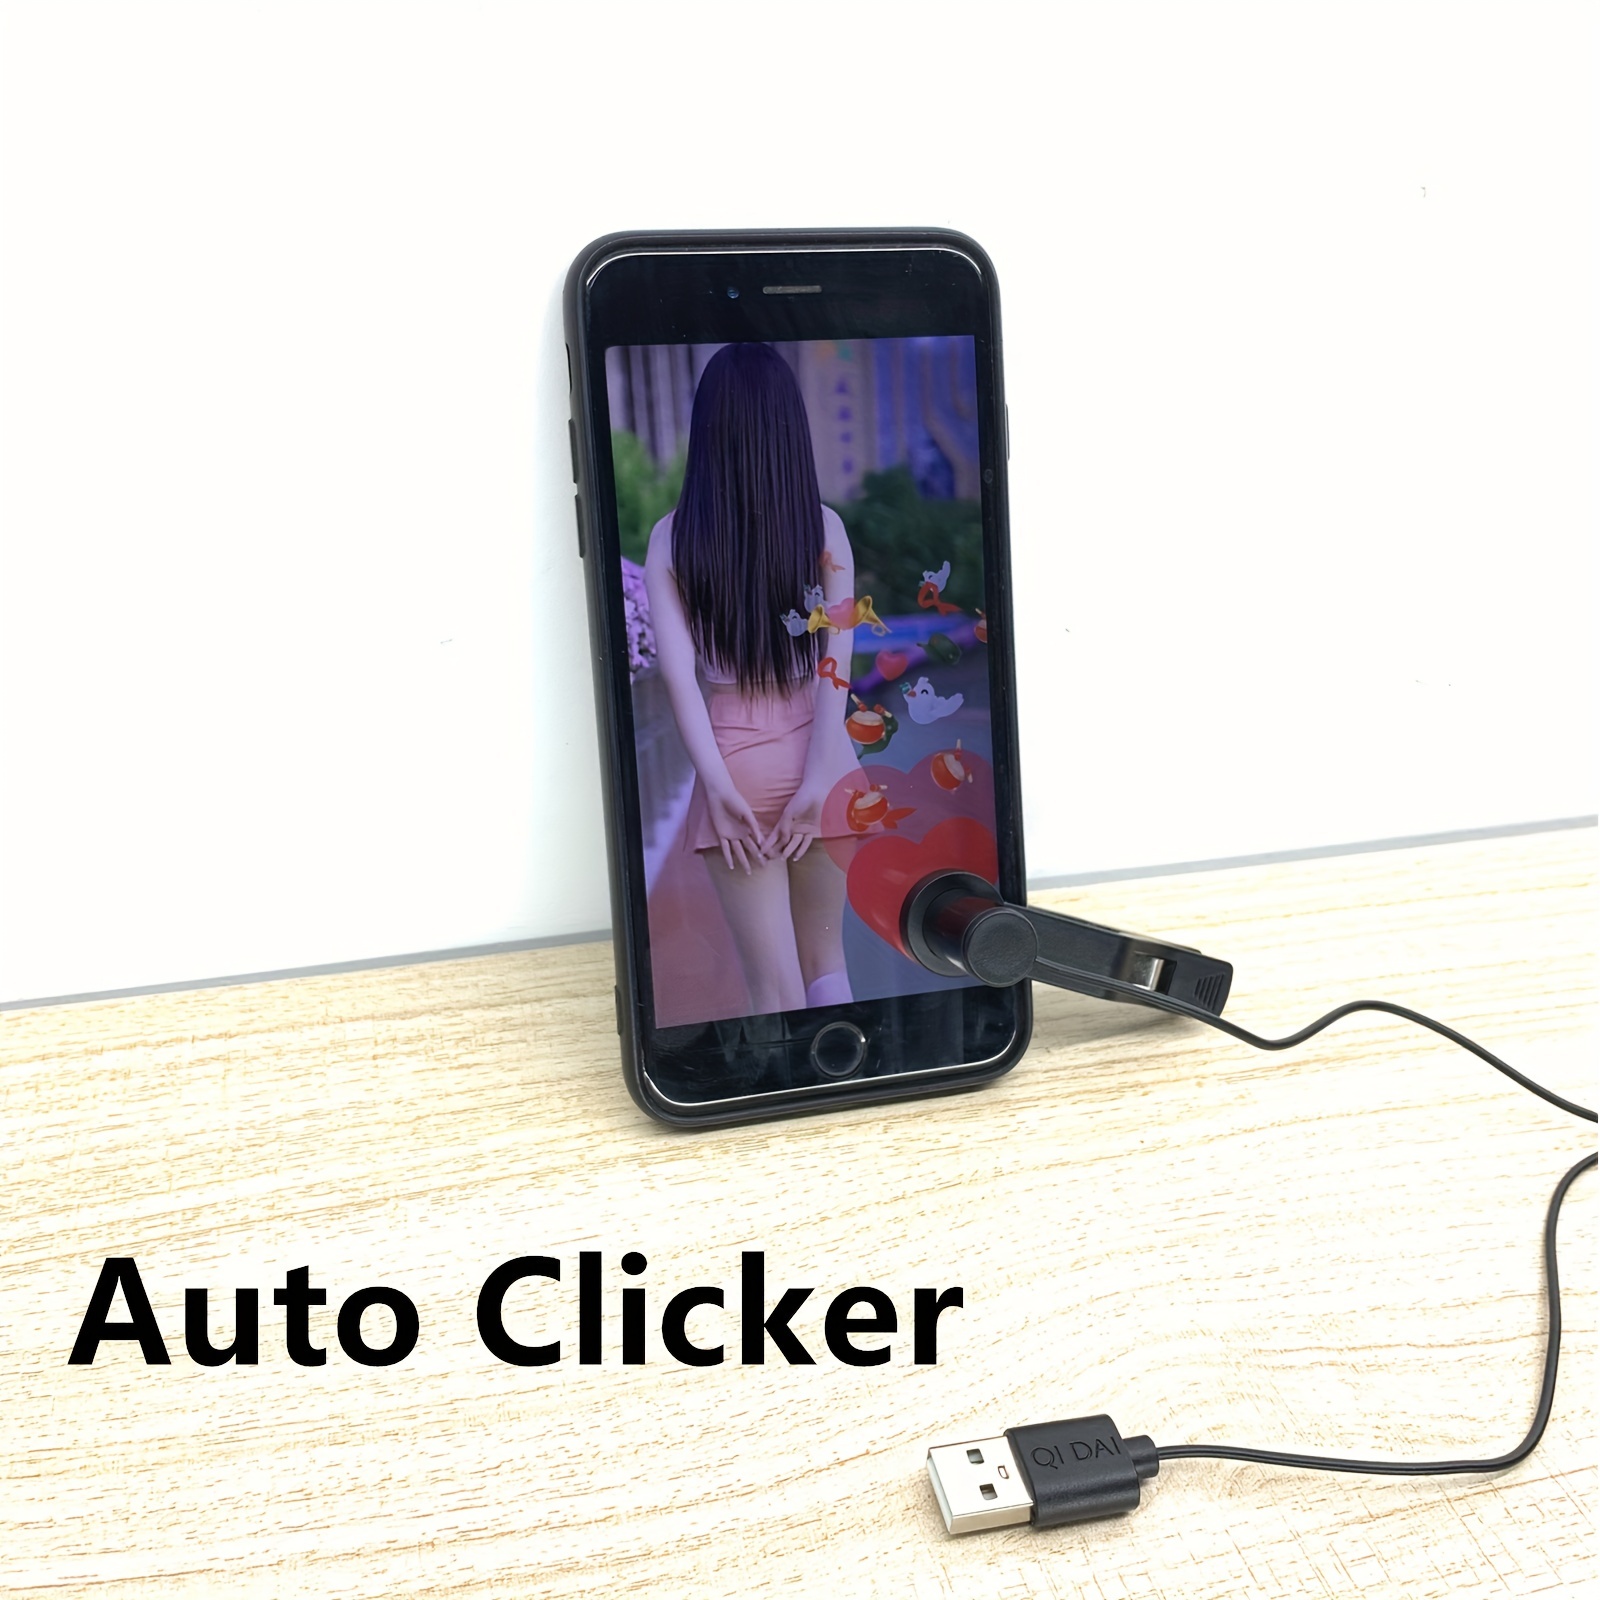 Enjoy Clickers, Products